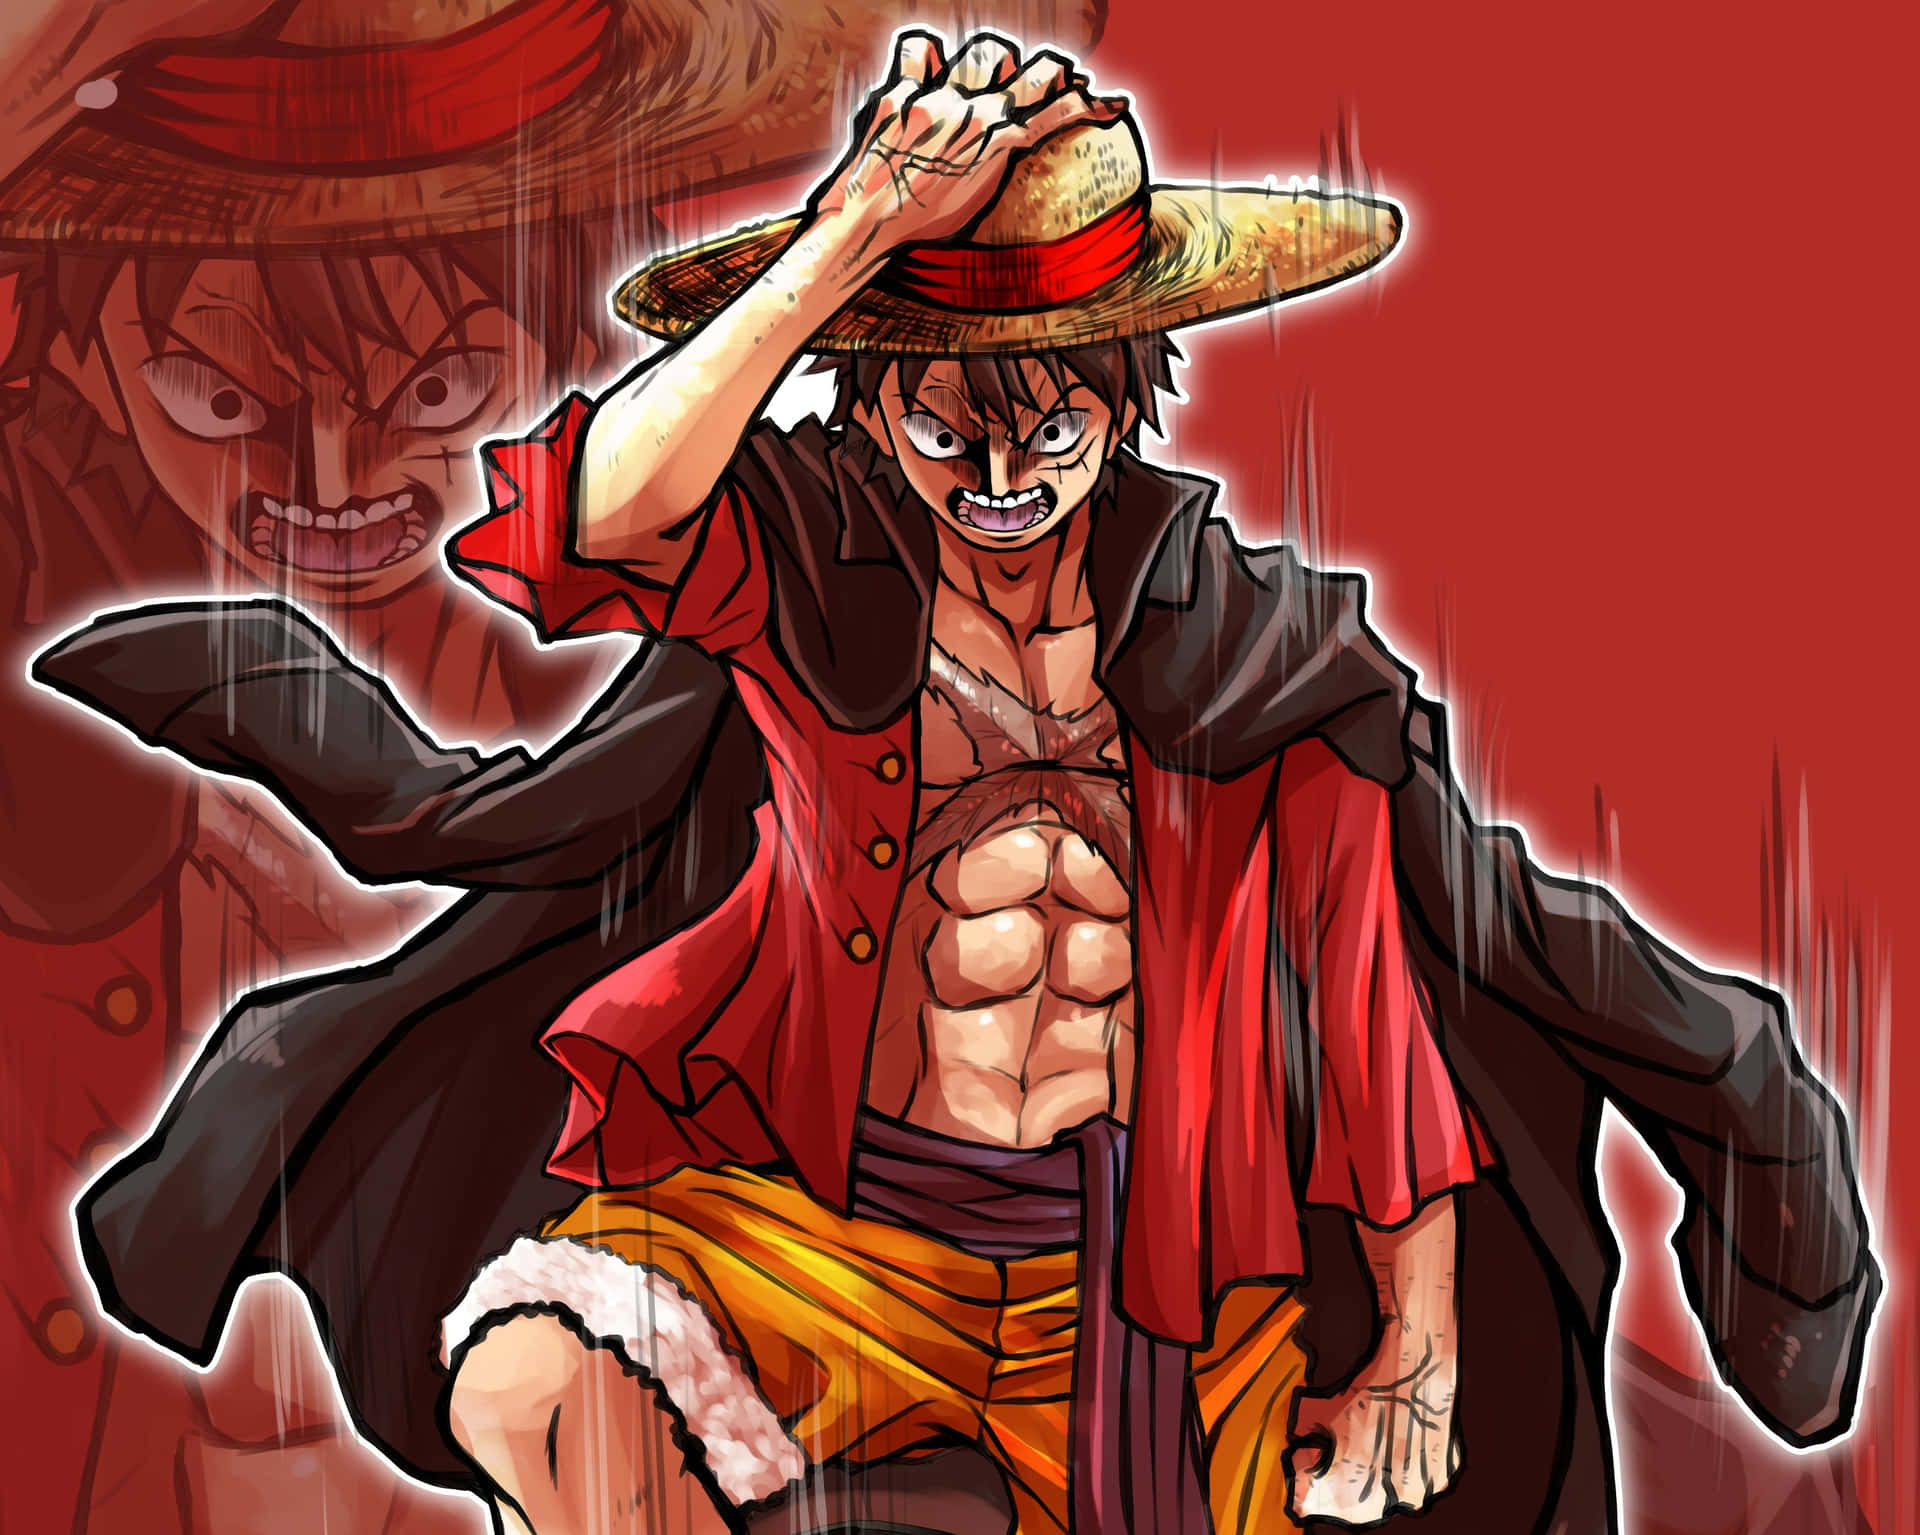 Monkey D. Luffy, the protagonist of One Piece